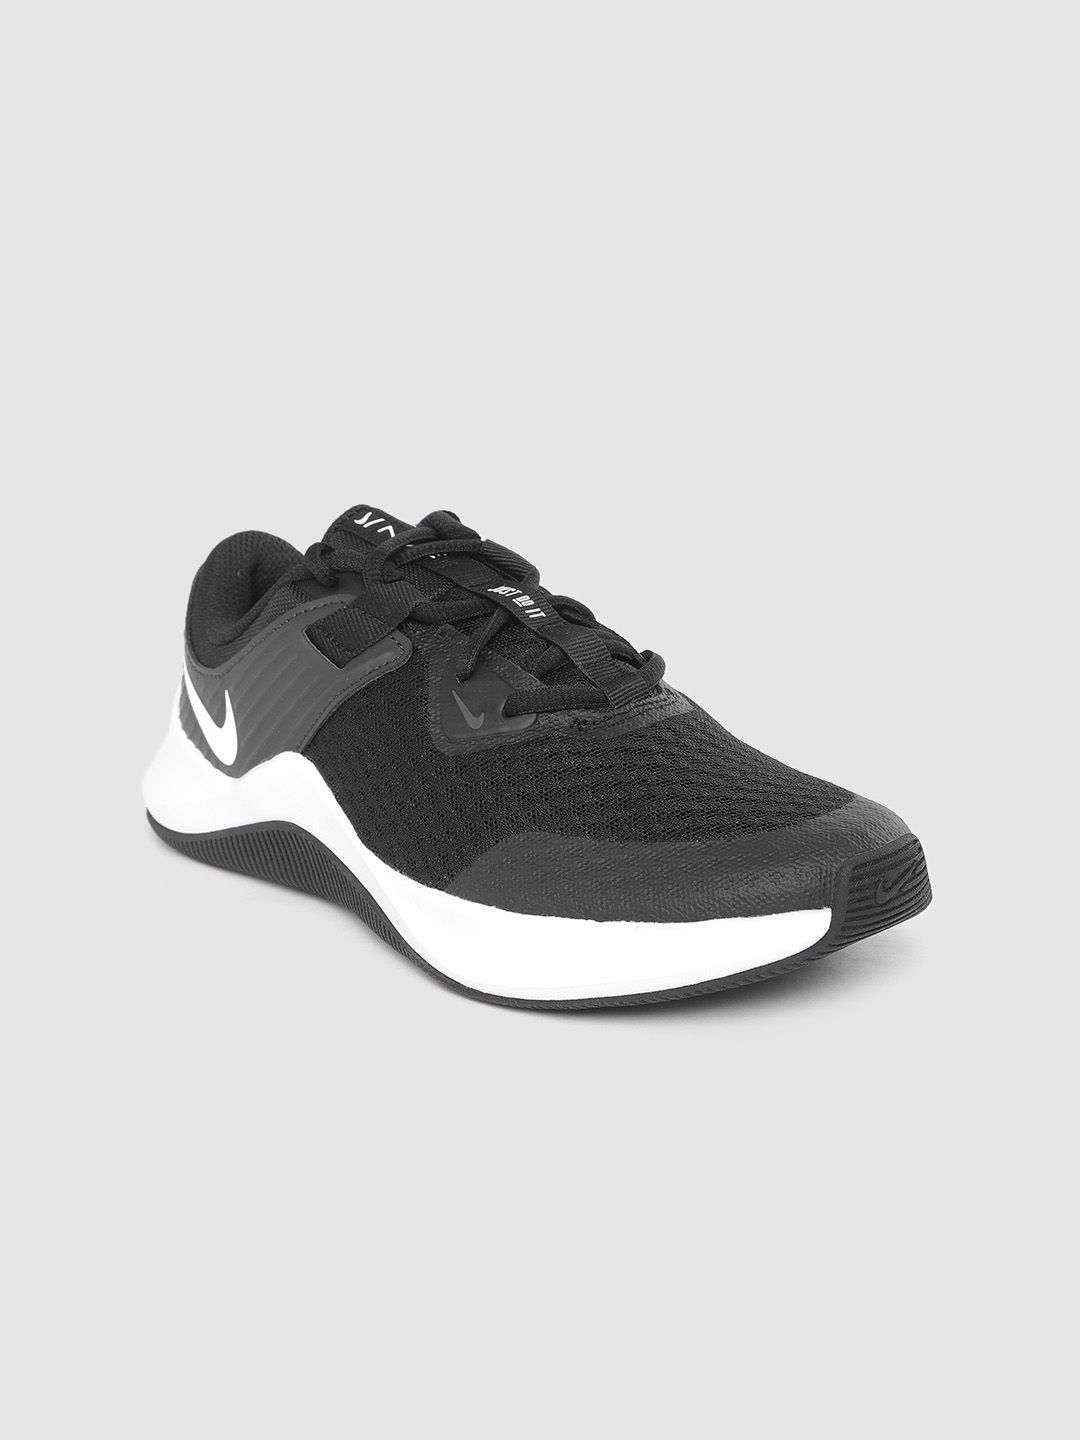 Nike Women Black Woven Design MC Trainer Shoes Price in India